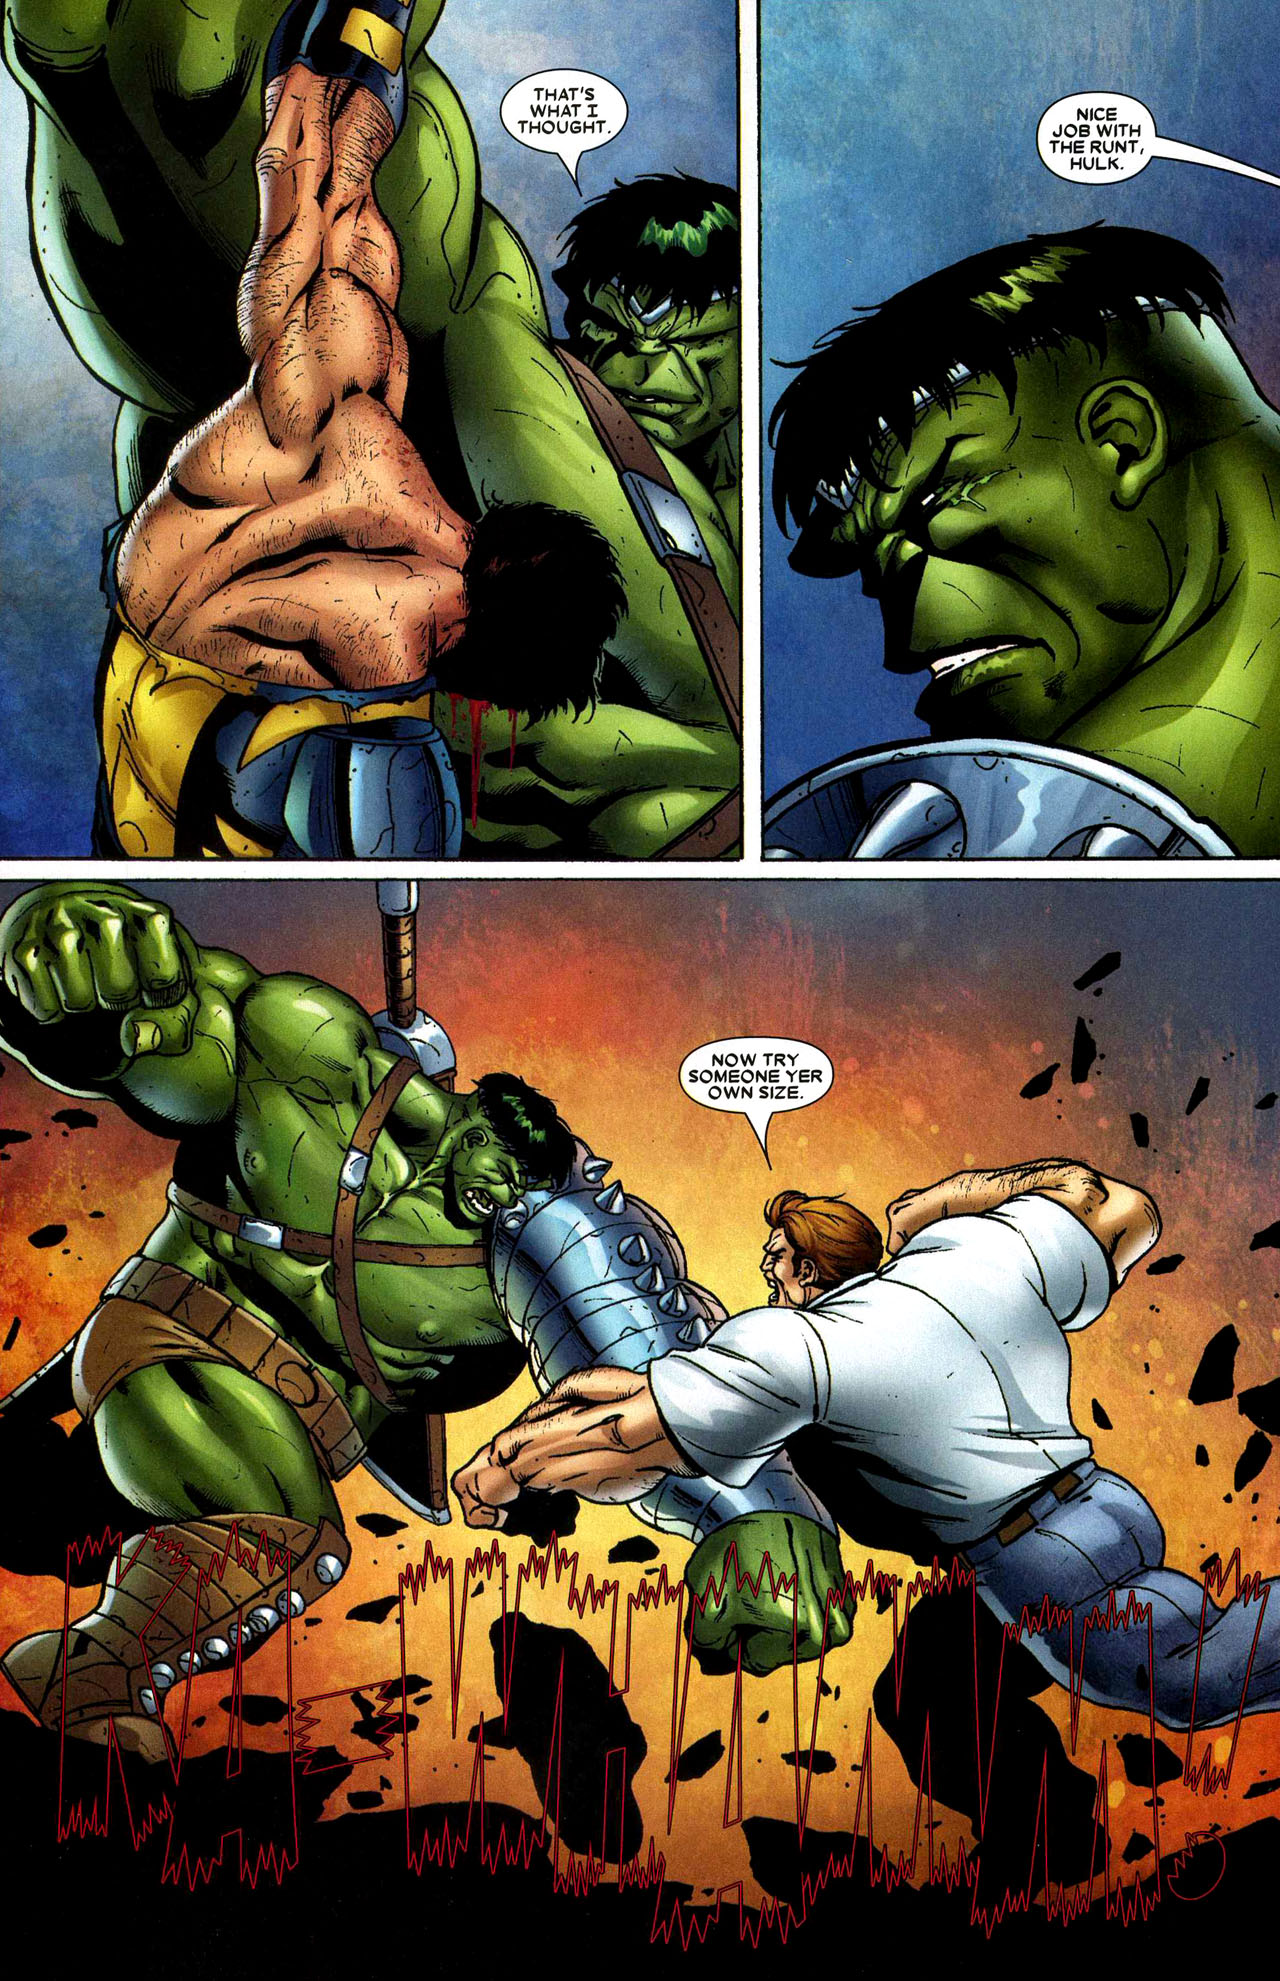 Looking Back At It The Hulk Doesnt Even Really Defeat